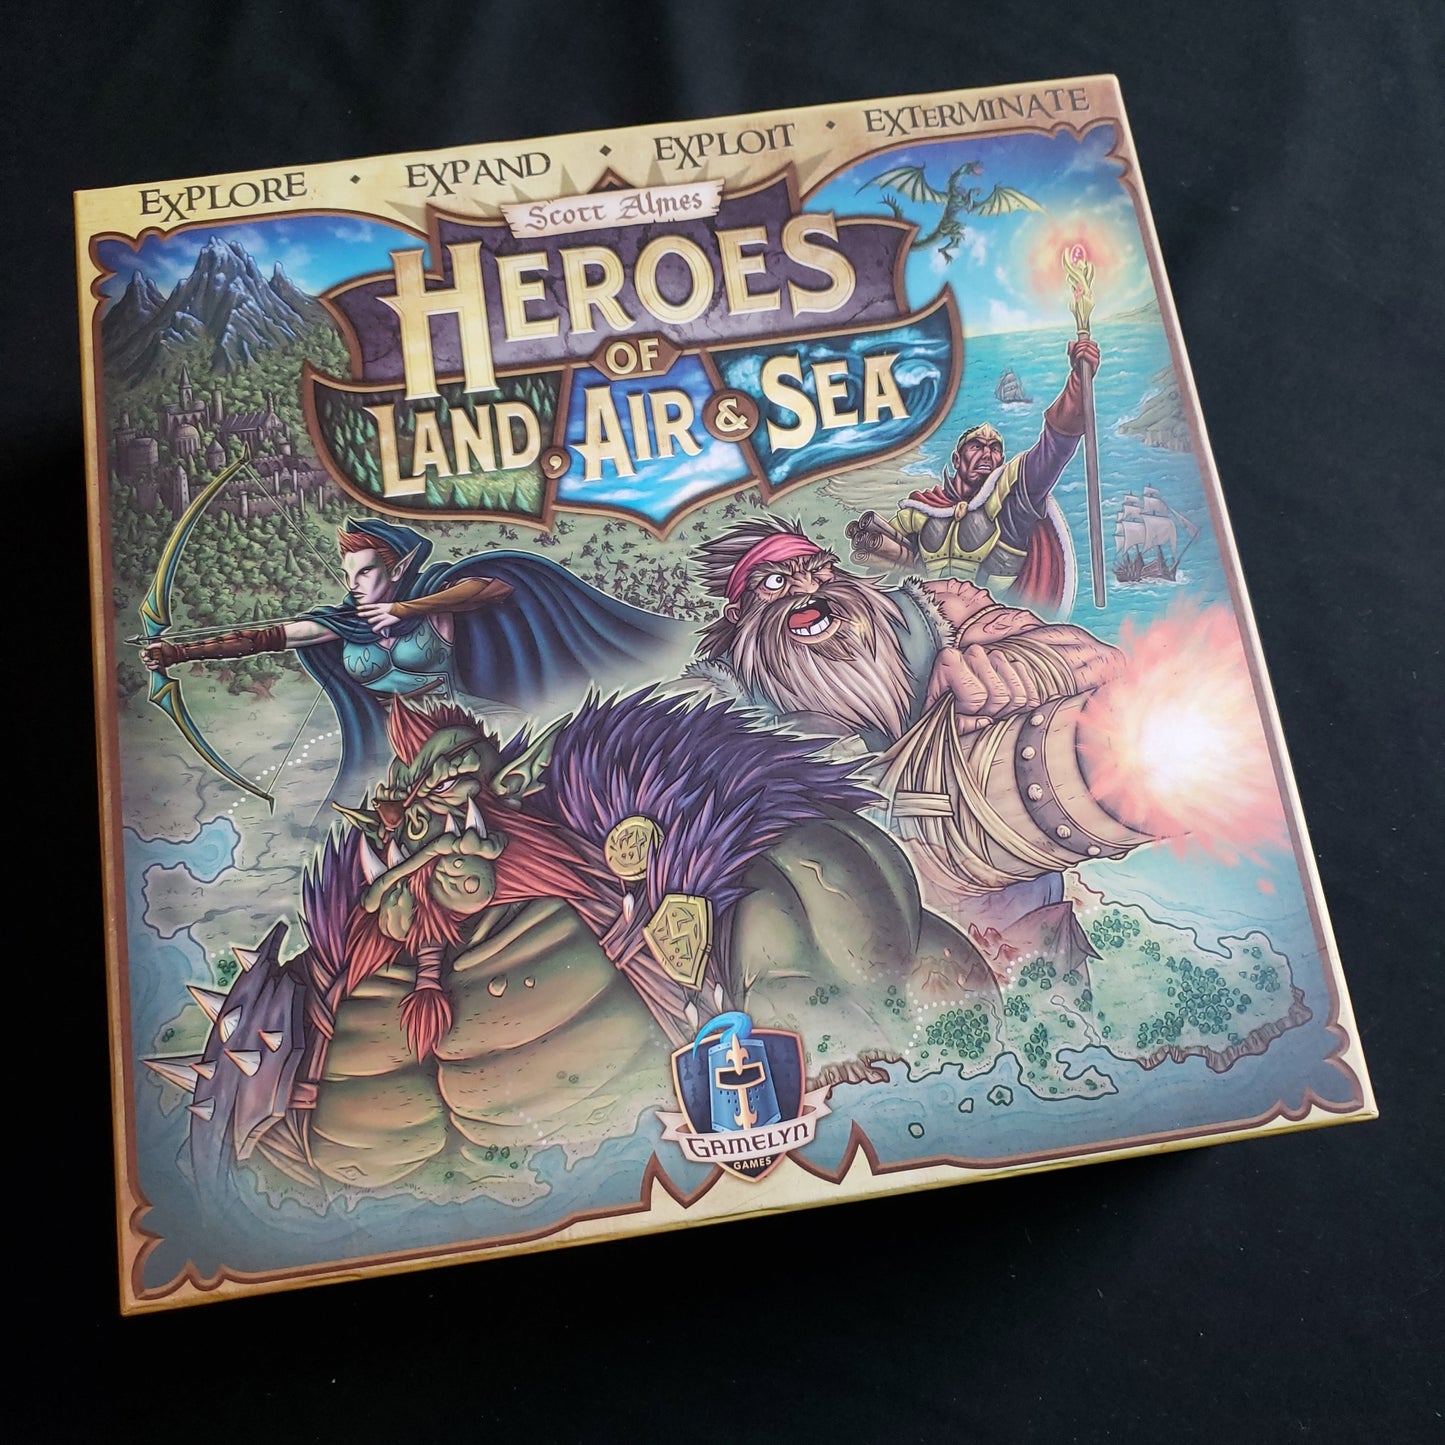 Image shows the front cover of the box of the Heroes of Land, Air & Sea board game